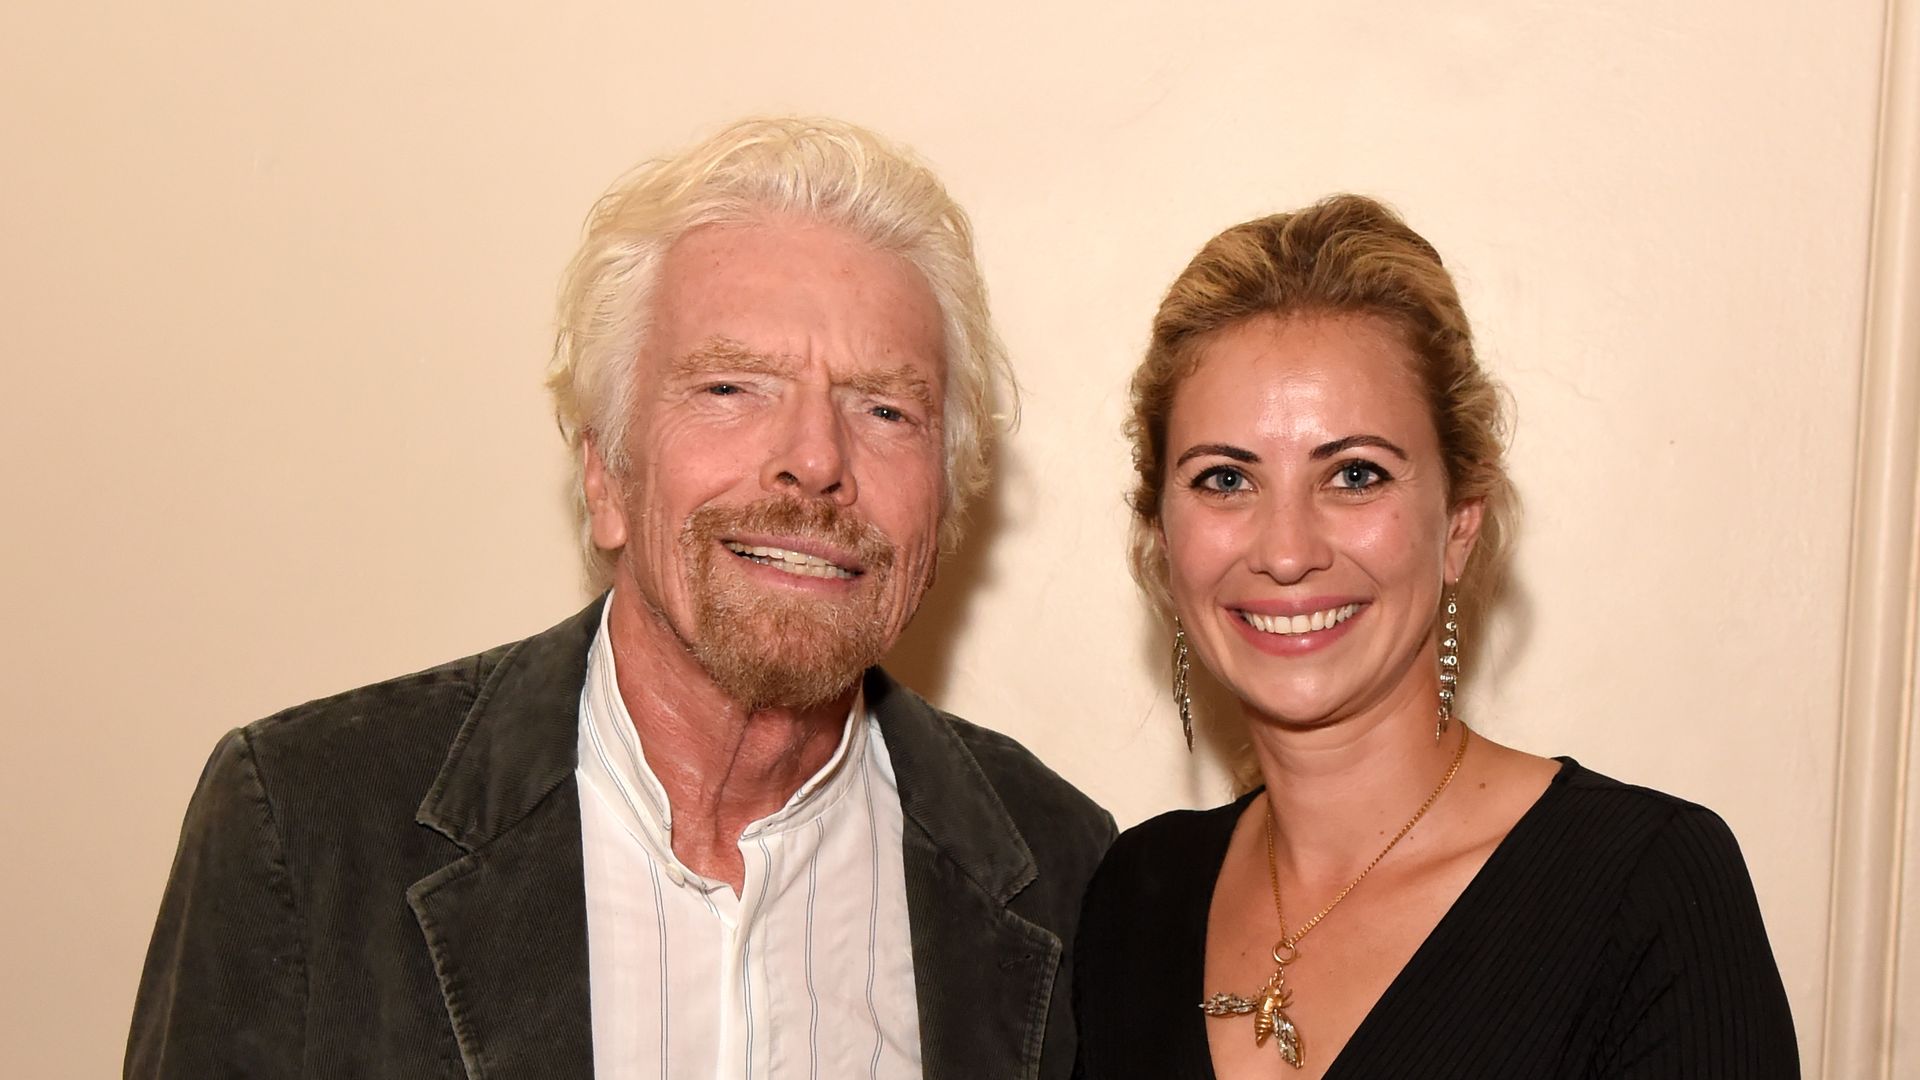 Richard Branson praised by daughter Holly as she shares son's dyslexia in heartwarming new pictures